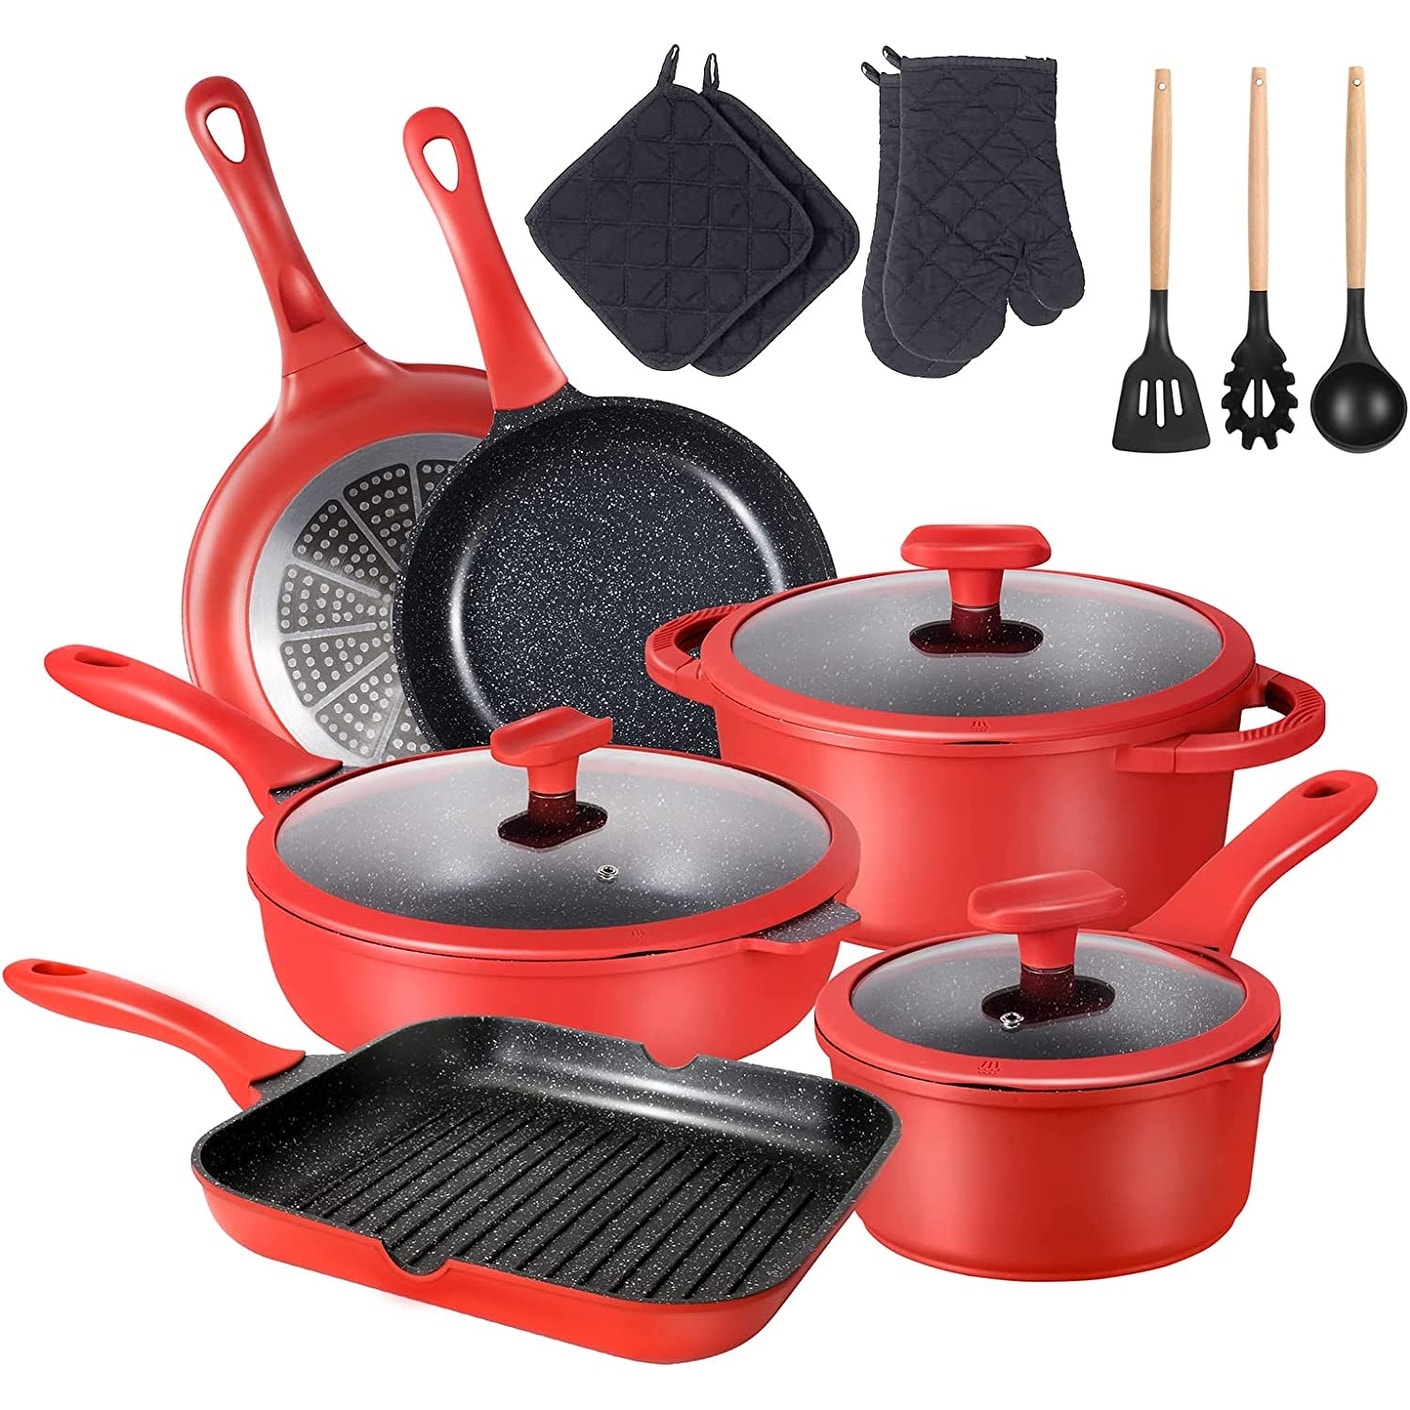 https://ak1.ostkcdn.com/images/products/is/images/direct/515af4c6bbb8e100145bb83b3a47c7531a23f5f7/Pots-and-Pans-Set%2C-Nonstick-16-Pieces%2C-Cookware-Sets-with-Granite-Coating%2C-Kitchen-Cookware-Set-Suitable-for-All-Cooktop.jpg